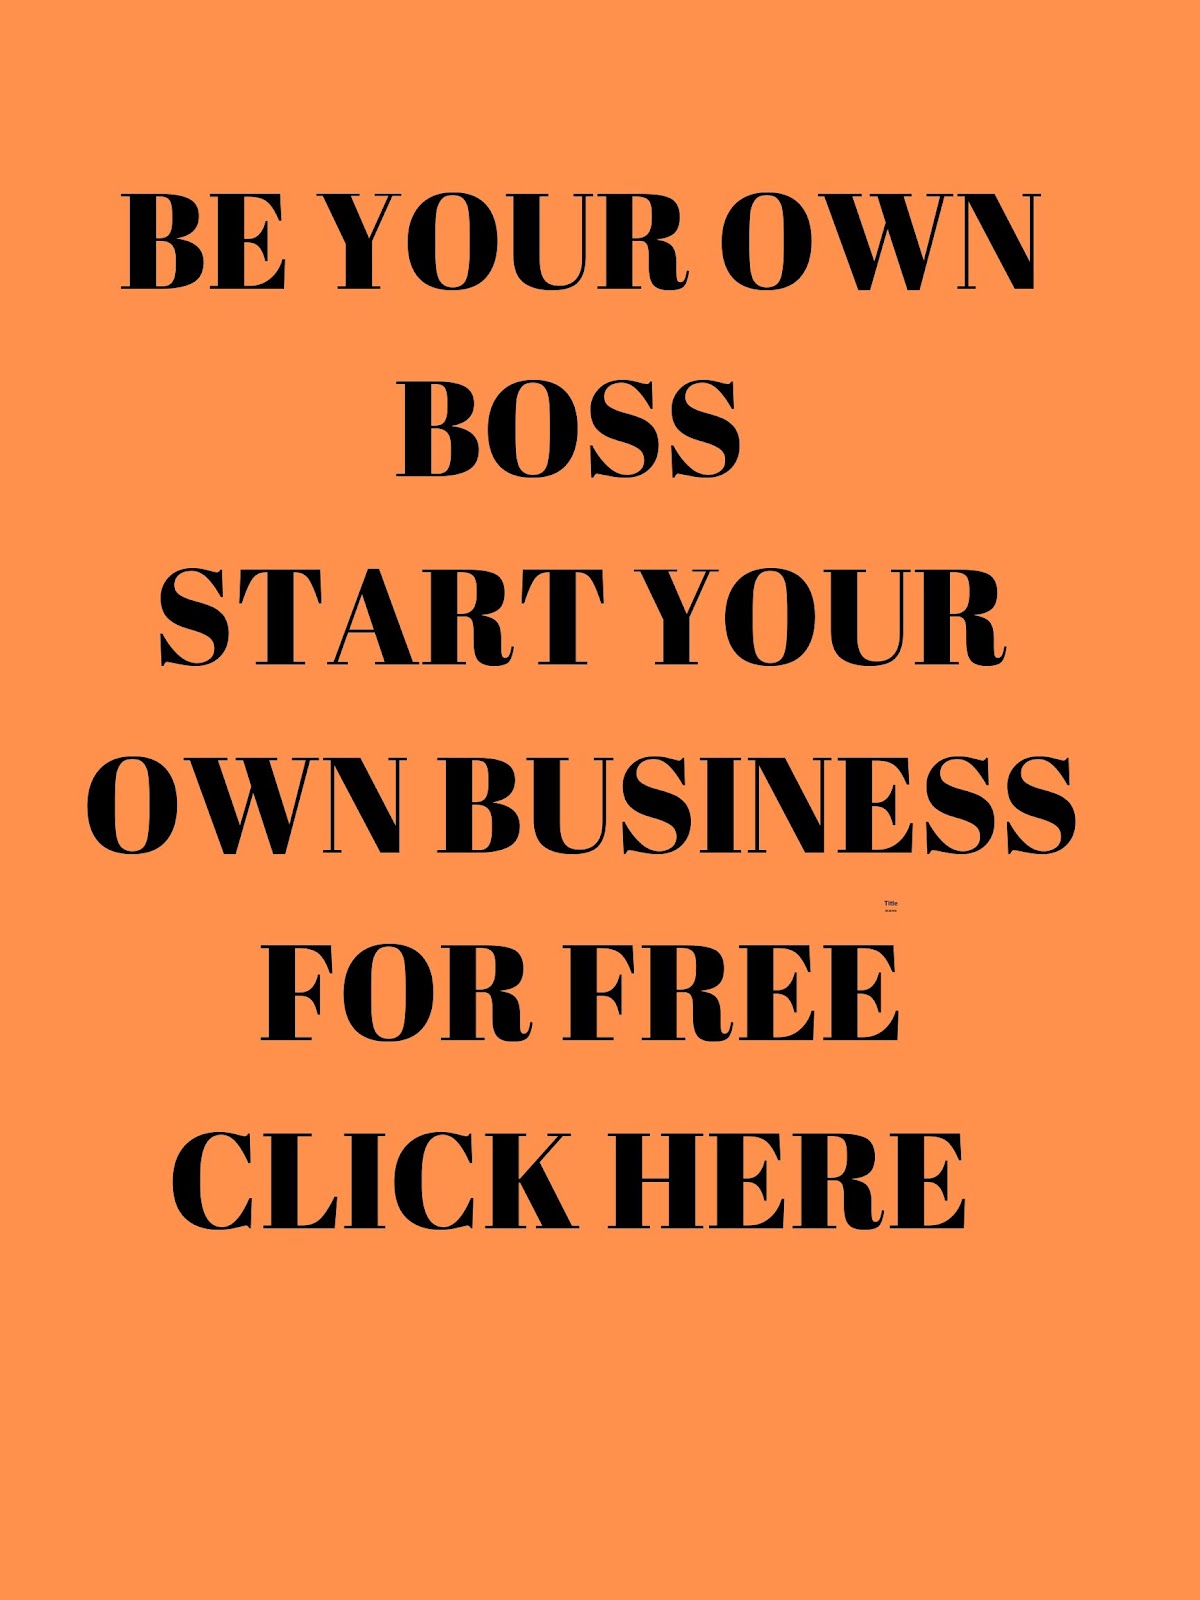 START YOUR ONLINE BUSINESS FREE